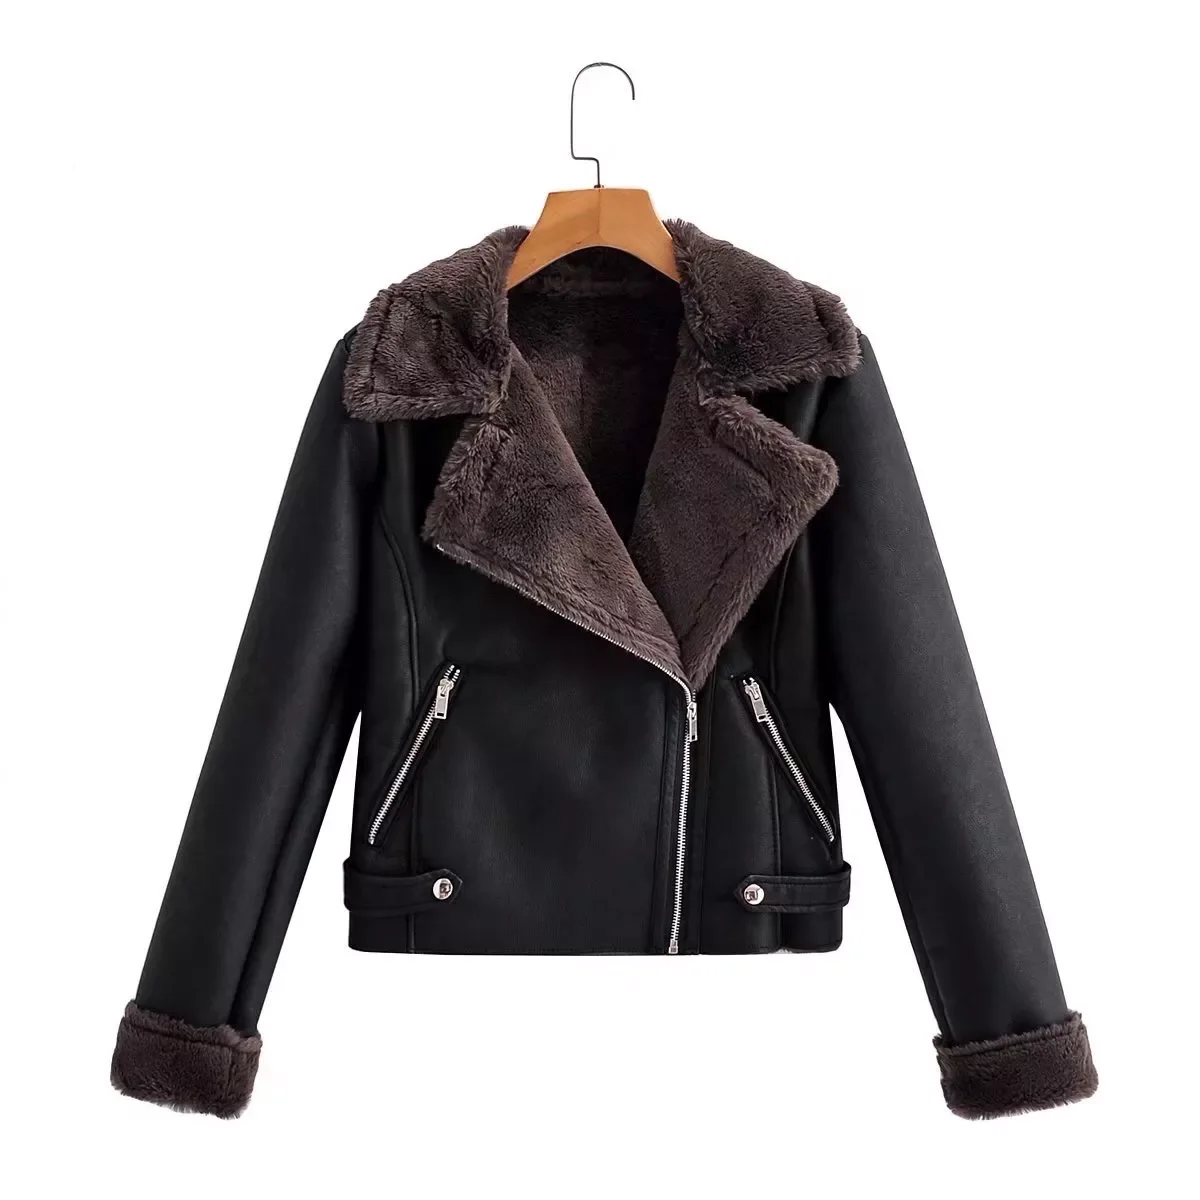 2021 New Women Winter Thick Faux Leather Lamb Fur Collar Jackets Lady Motorcycle Black Short Zipper Wool High Street Coats Tops enlarge